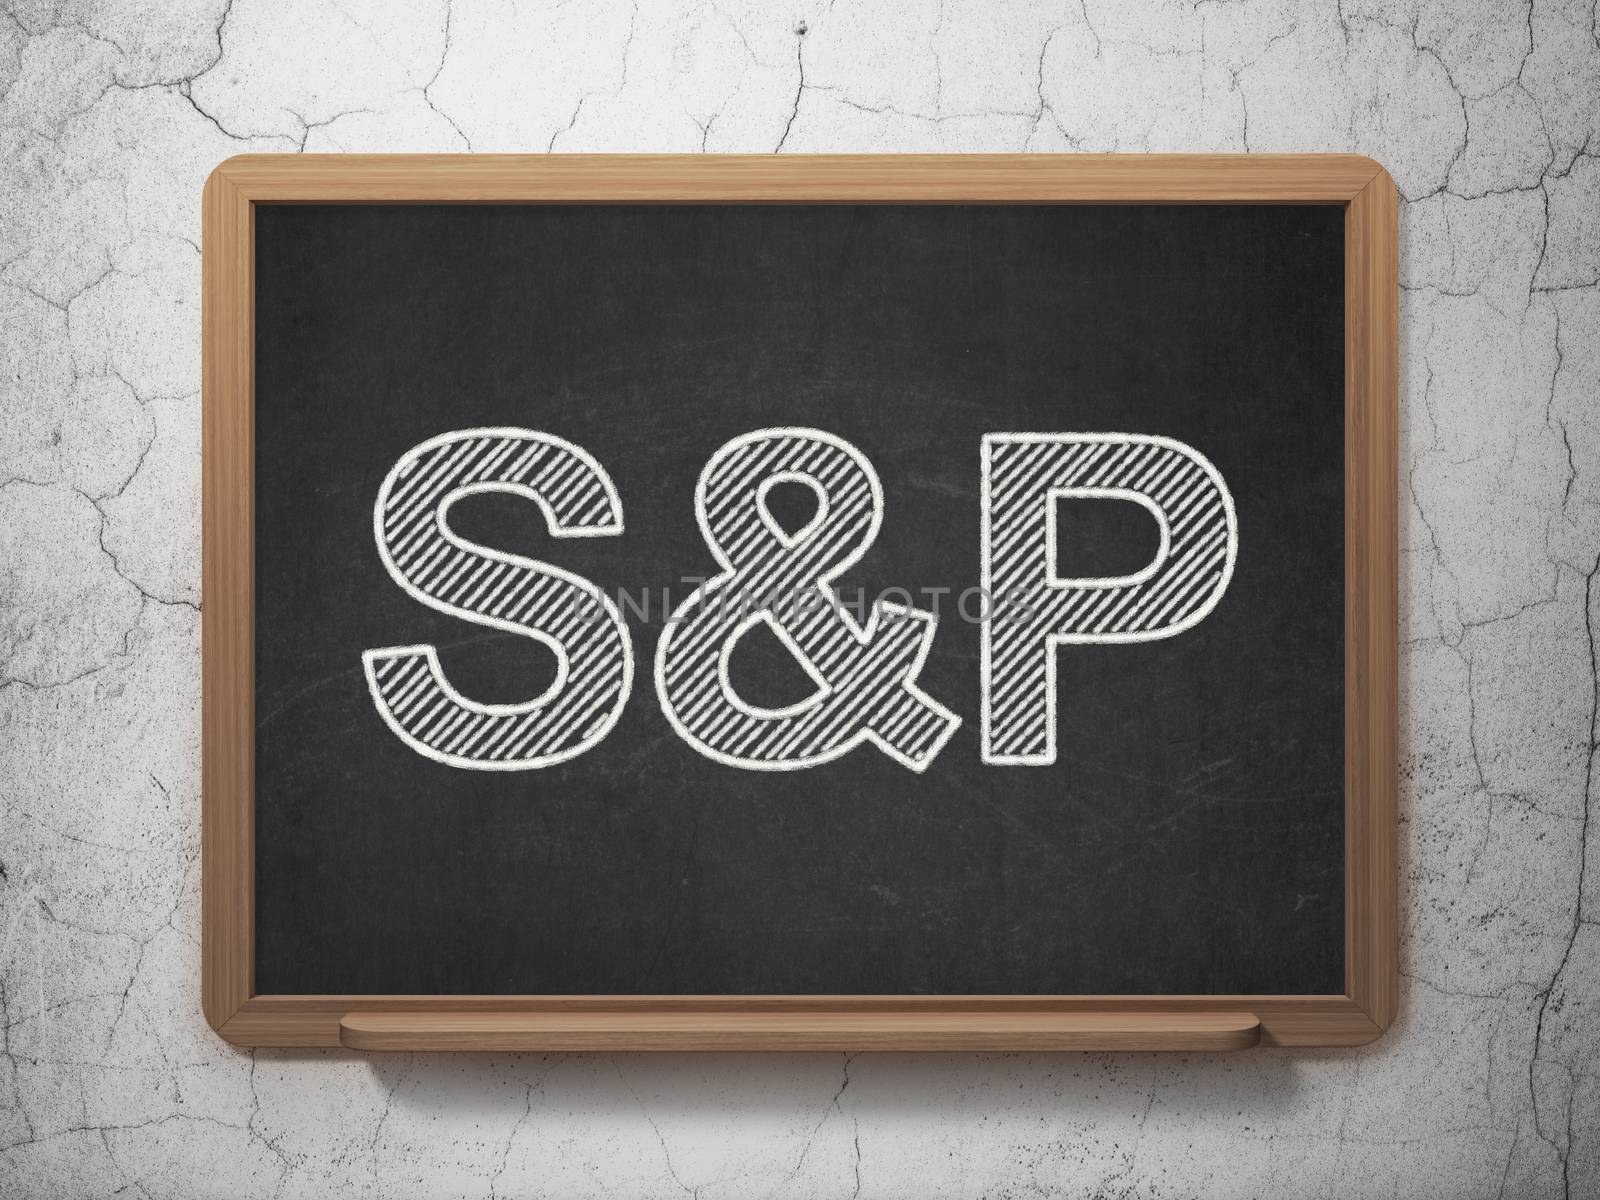 Stock market indexes concept: text S&P on Black chalkboard on grunge wall background, 3D rendering